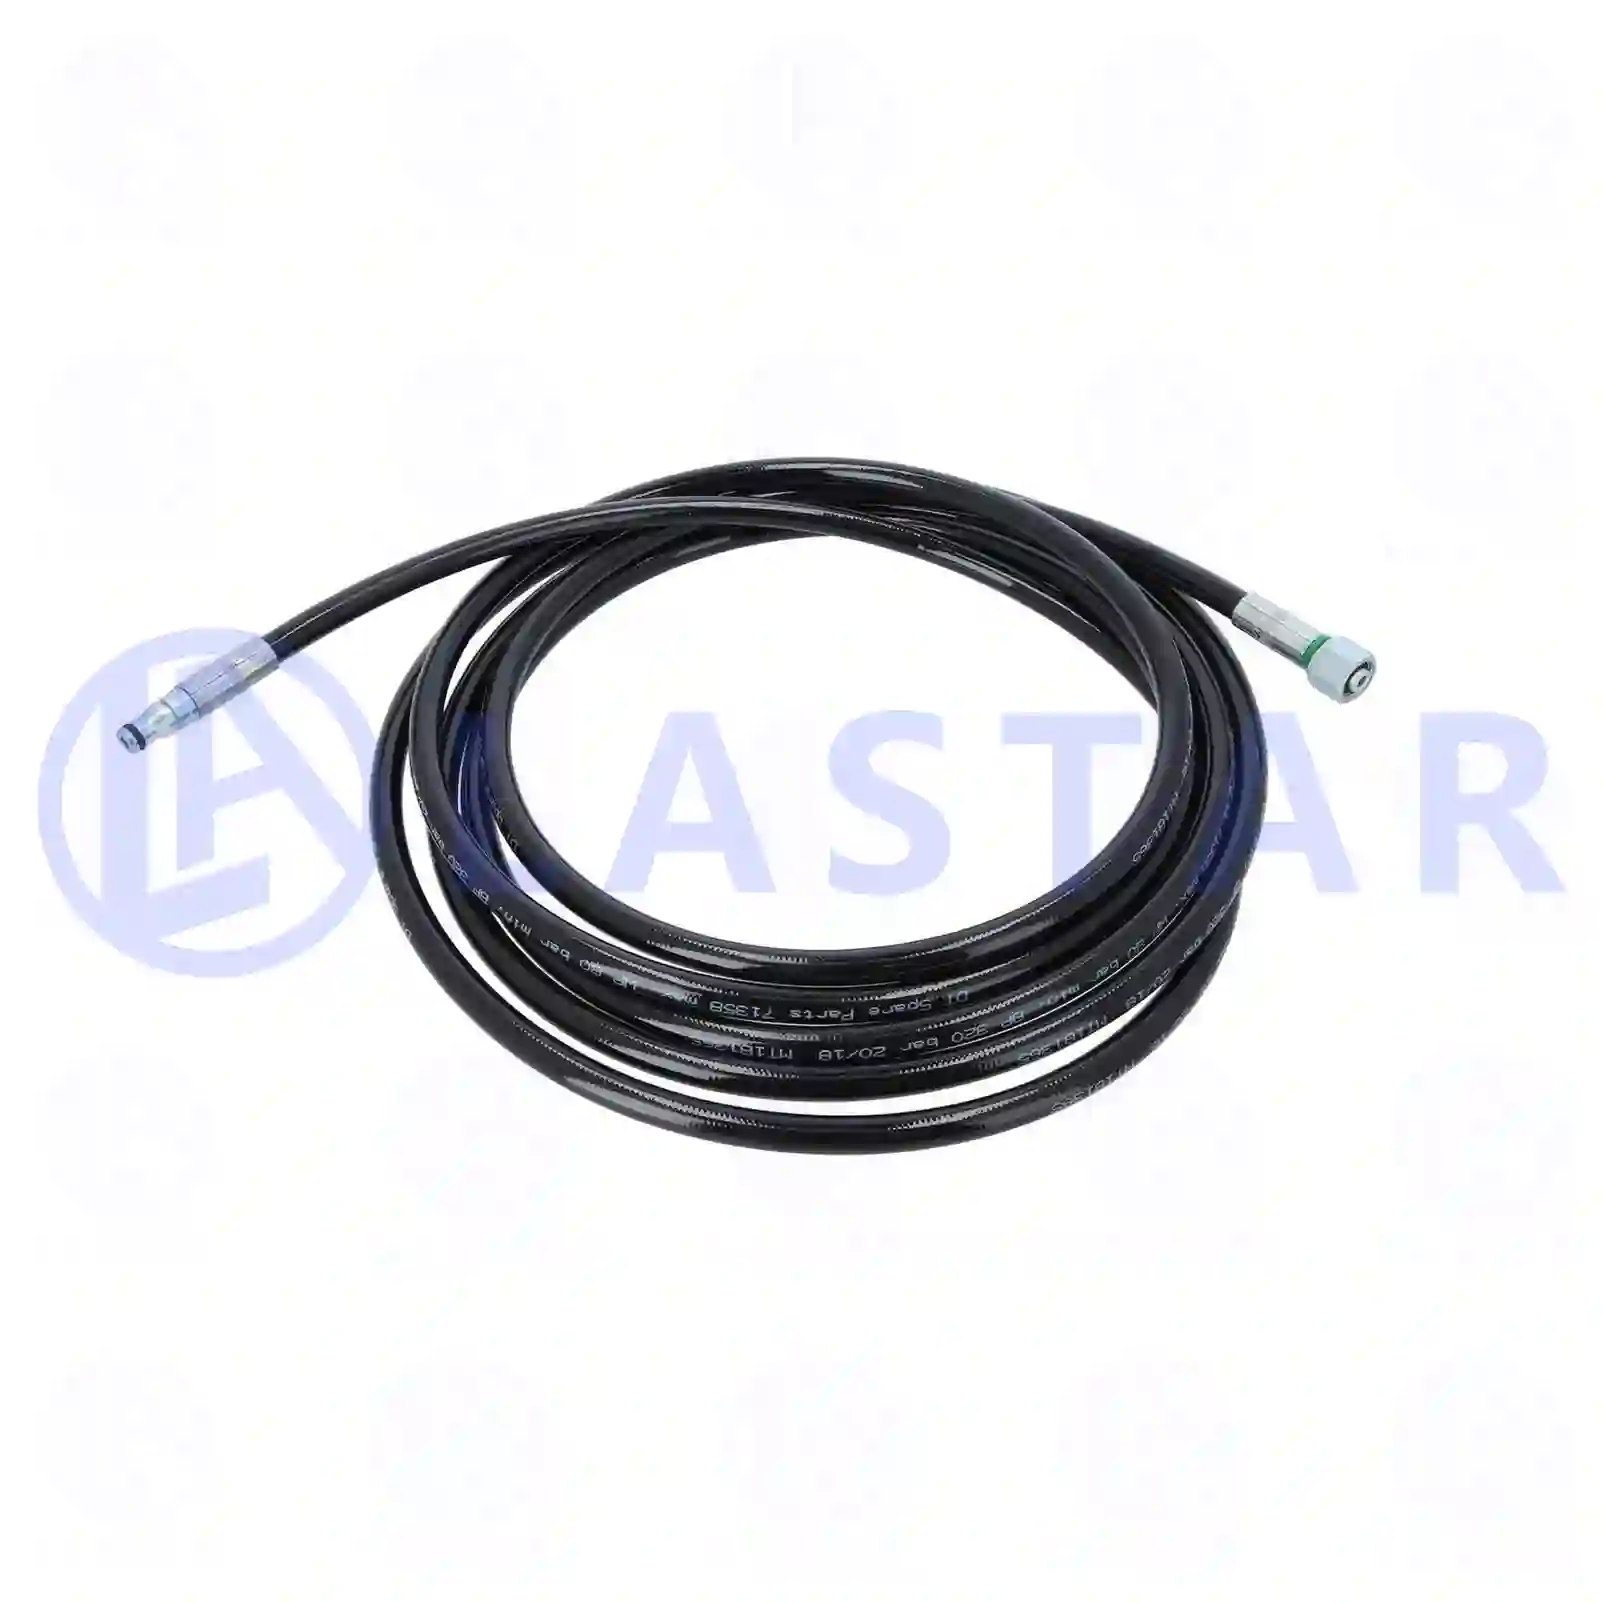 Hydraulic hose, 77722231, 20466646, ZG00274-0008 ||  77722231 Lastar Spare Part | Truck Spare Parts, Auotomotive Spare Parts Hydraulic hose, 77722231, 20466646, ZG00274-0008 ||  77722231 Lastar Spare Part | Truck Spare Parts, Auotomotive Spare Parts